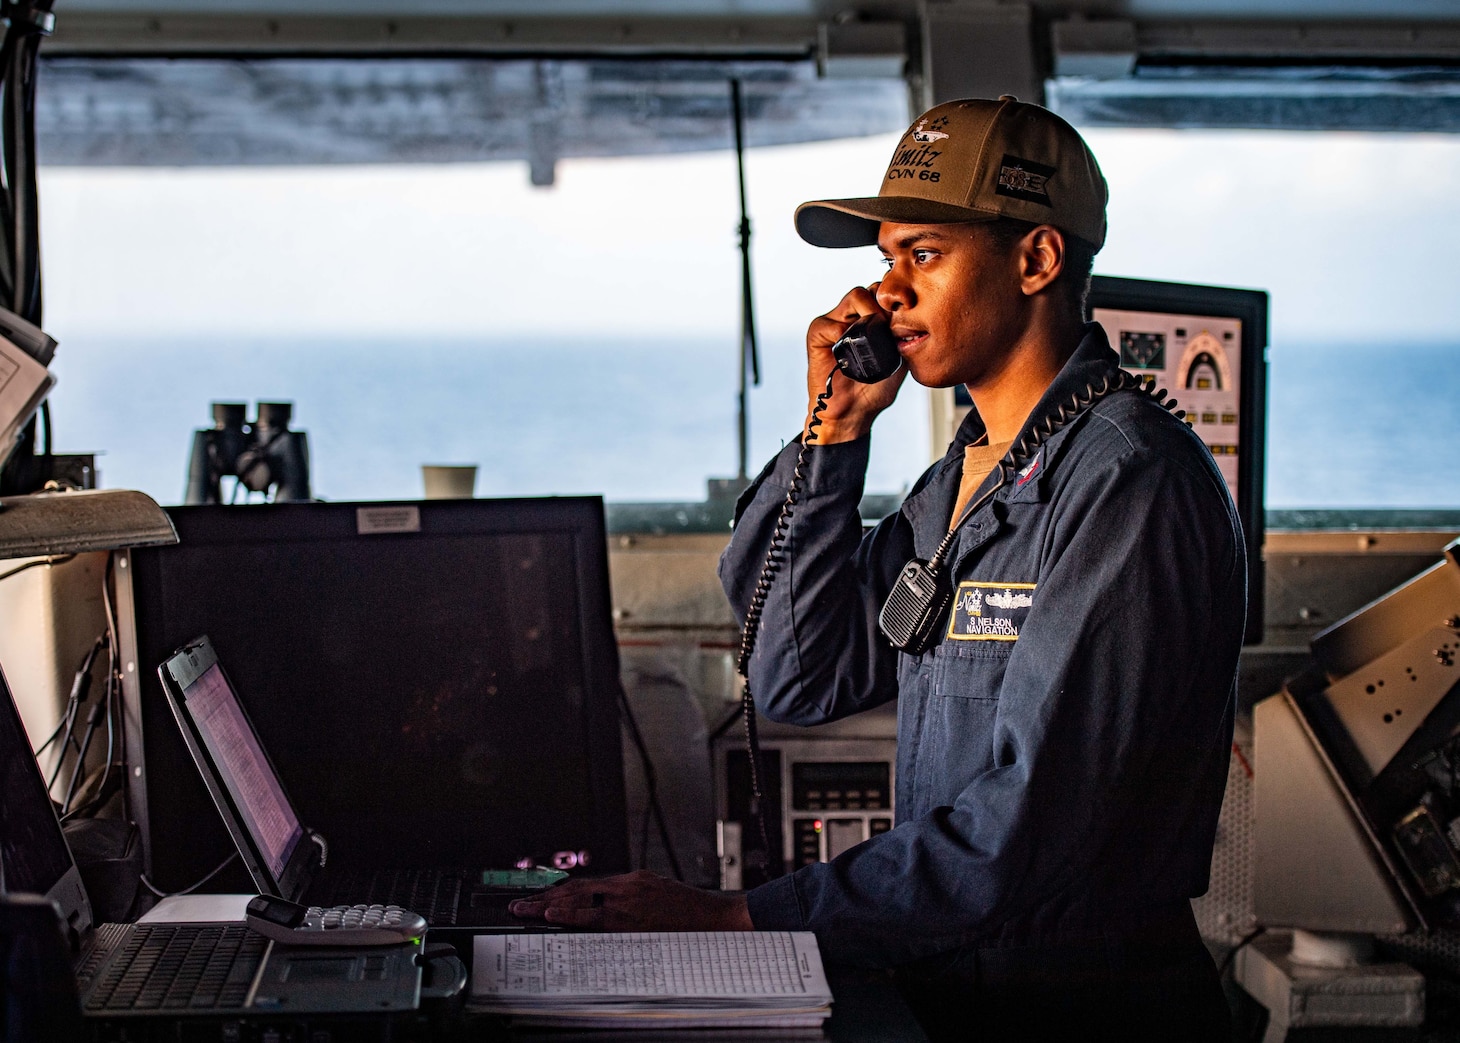 SOUTH CHINA SEA (Jan. 12, 2023) U.S. Navy Quartermaster 2nd Class Sebastian Nelson, from Miami, stands watch in the pilothouse of the aircraft carrier USS Nimitz (CVN 68). Nimitz is in U.S. 7th Fleet conducting routine operations. 7th Fleet is the U.S. Navy's largest forward-deployed numbered fleet, and routinely interacts and operates with Allies and partners in preserving a free and open Indo-Pacific region. (U.S. Navy photo by Mass Communication Specialist 3rd Class Hannah Kantner)